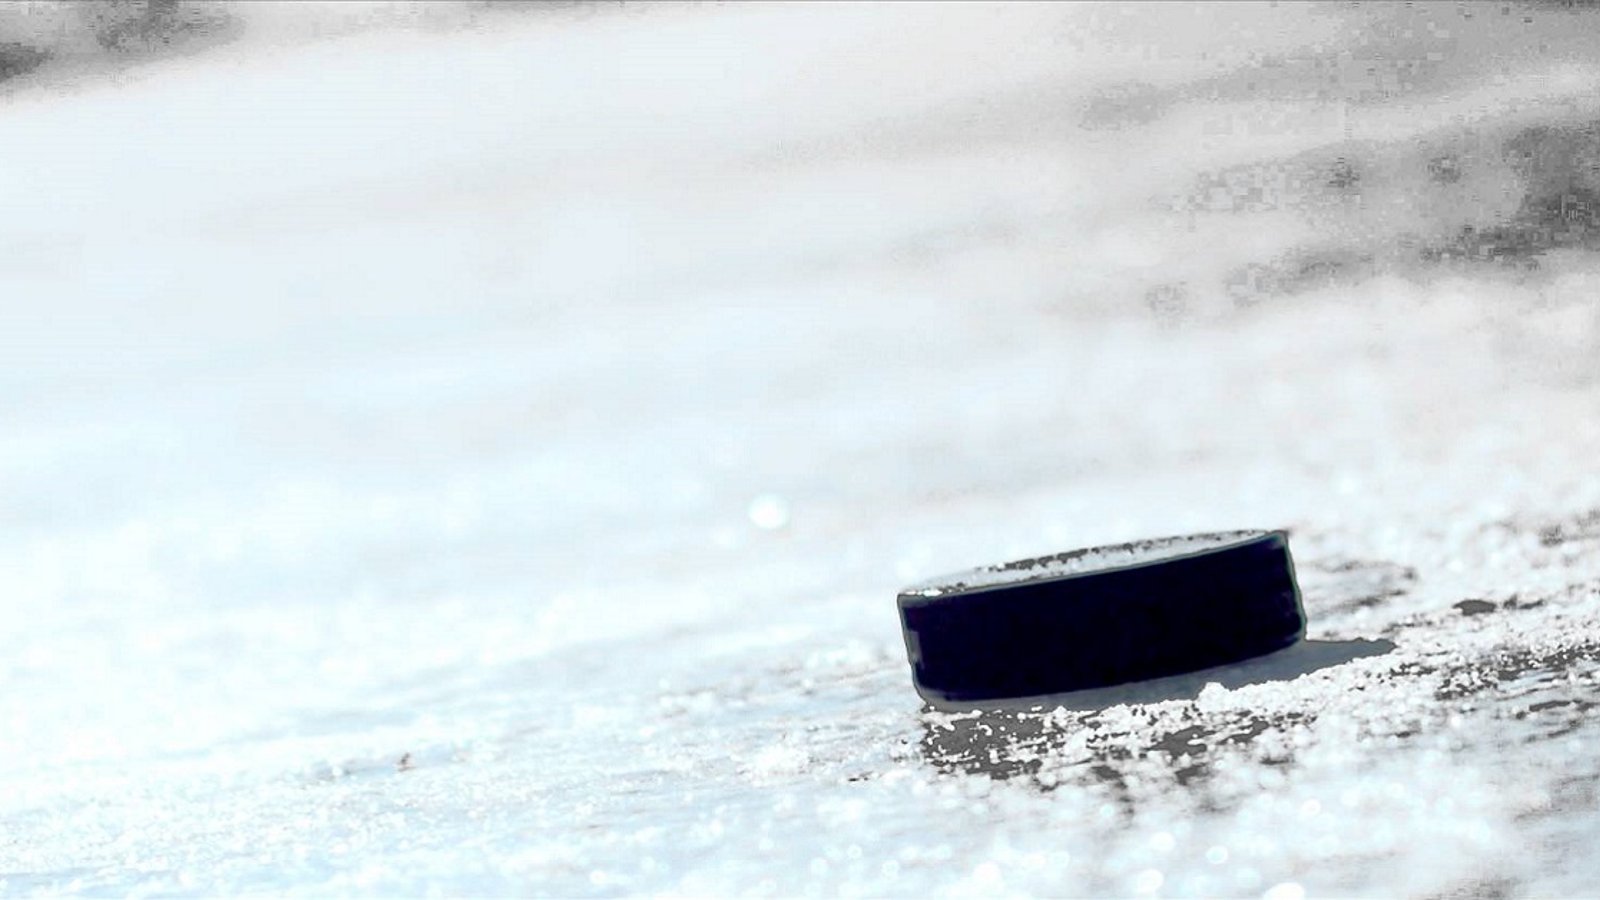 Young player who collapsed after leaving the ice Sunday has died from “blunt-impact head trauma.”